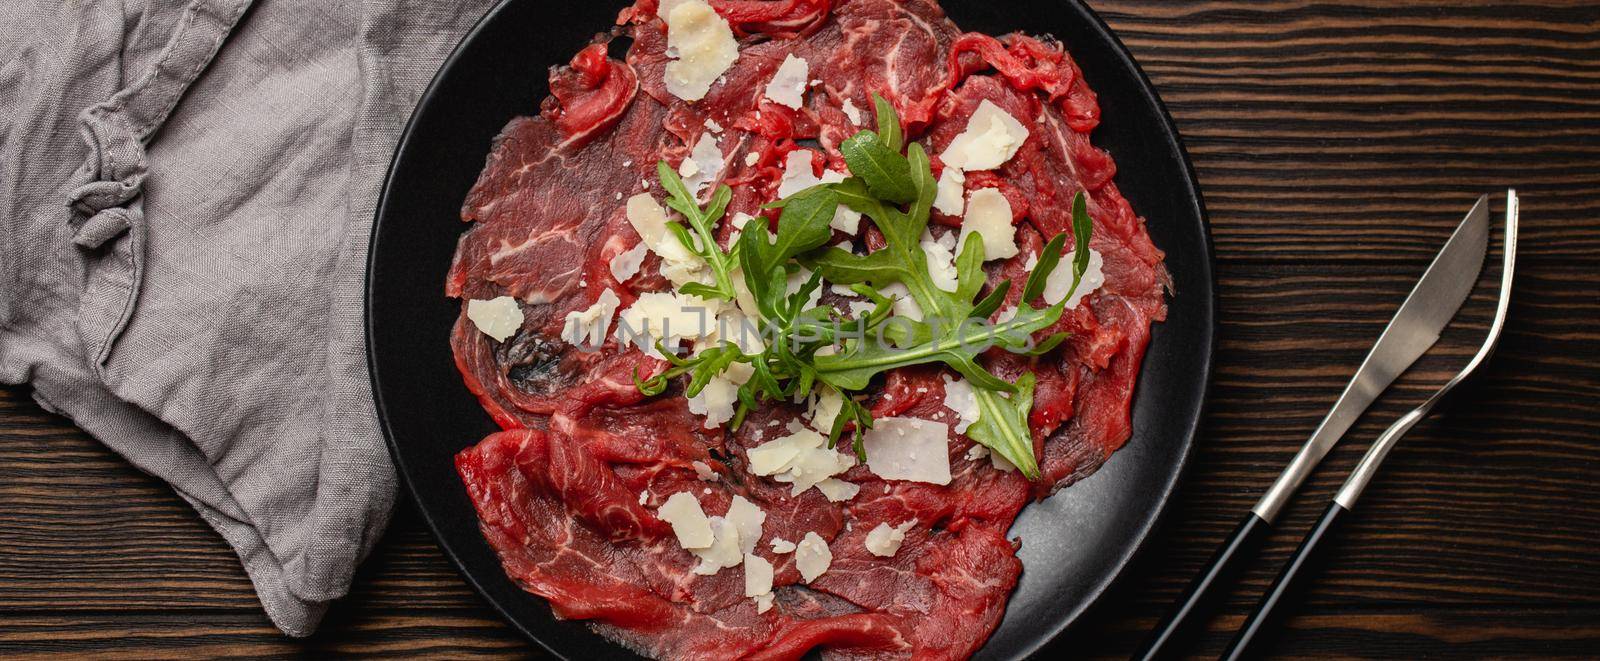 Cold meat appetizer Beef carpaccio with parmesan cheese and arugula on black plate by its_al_dente